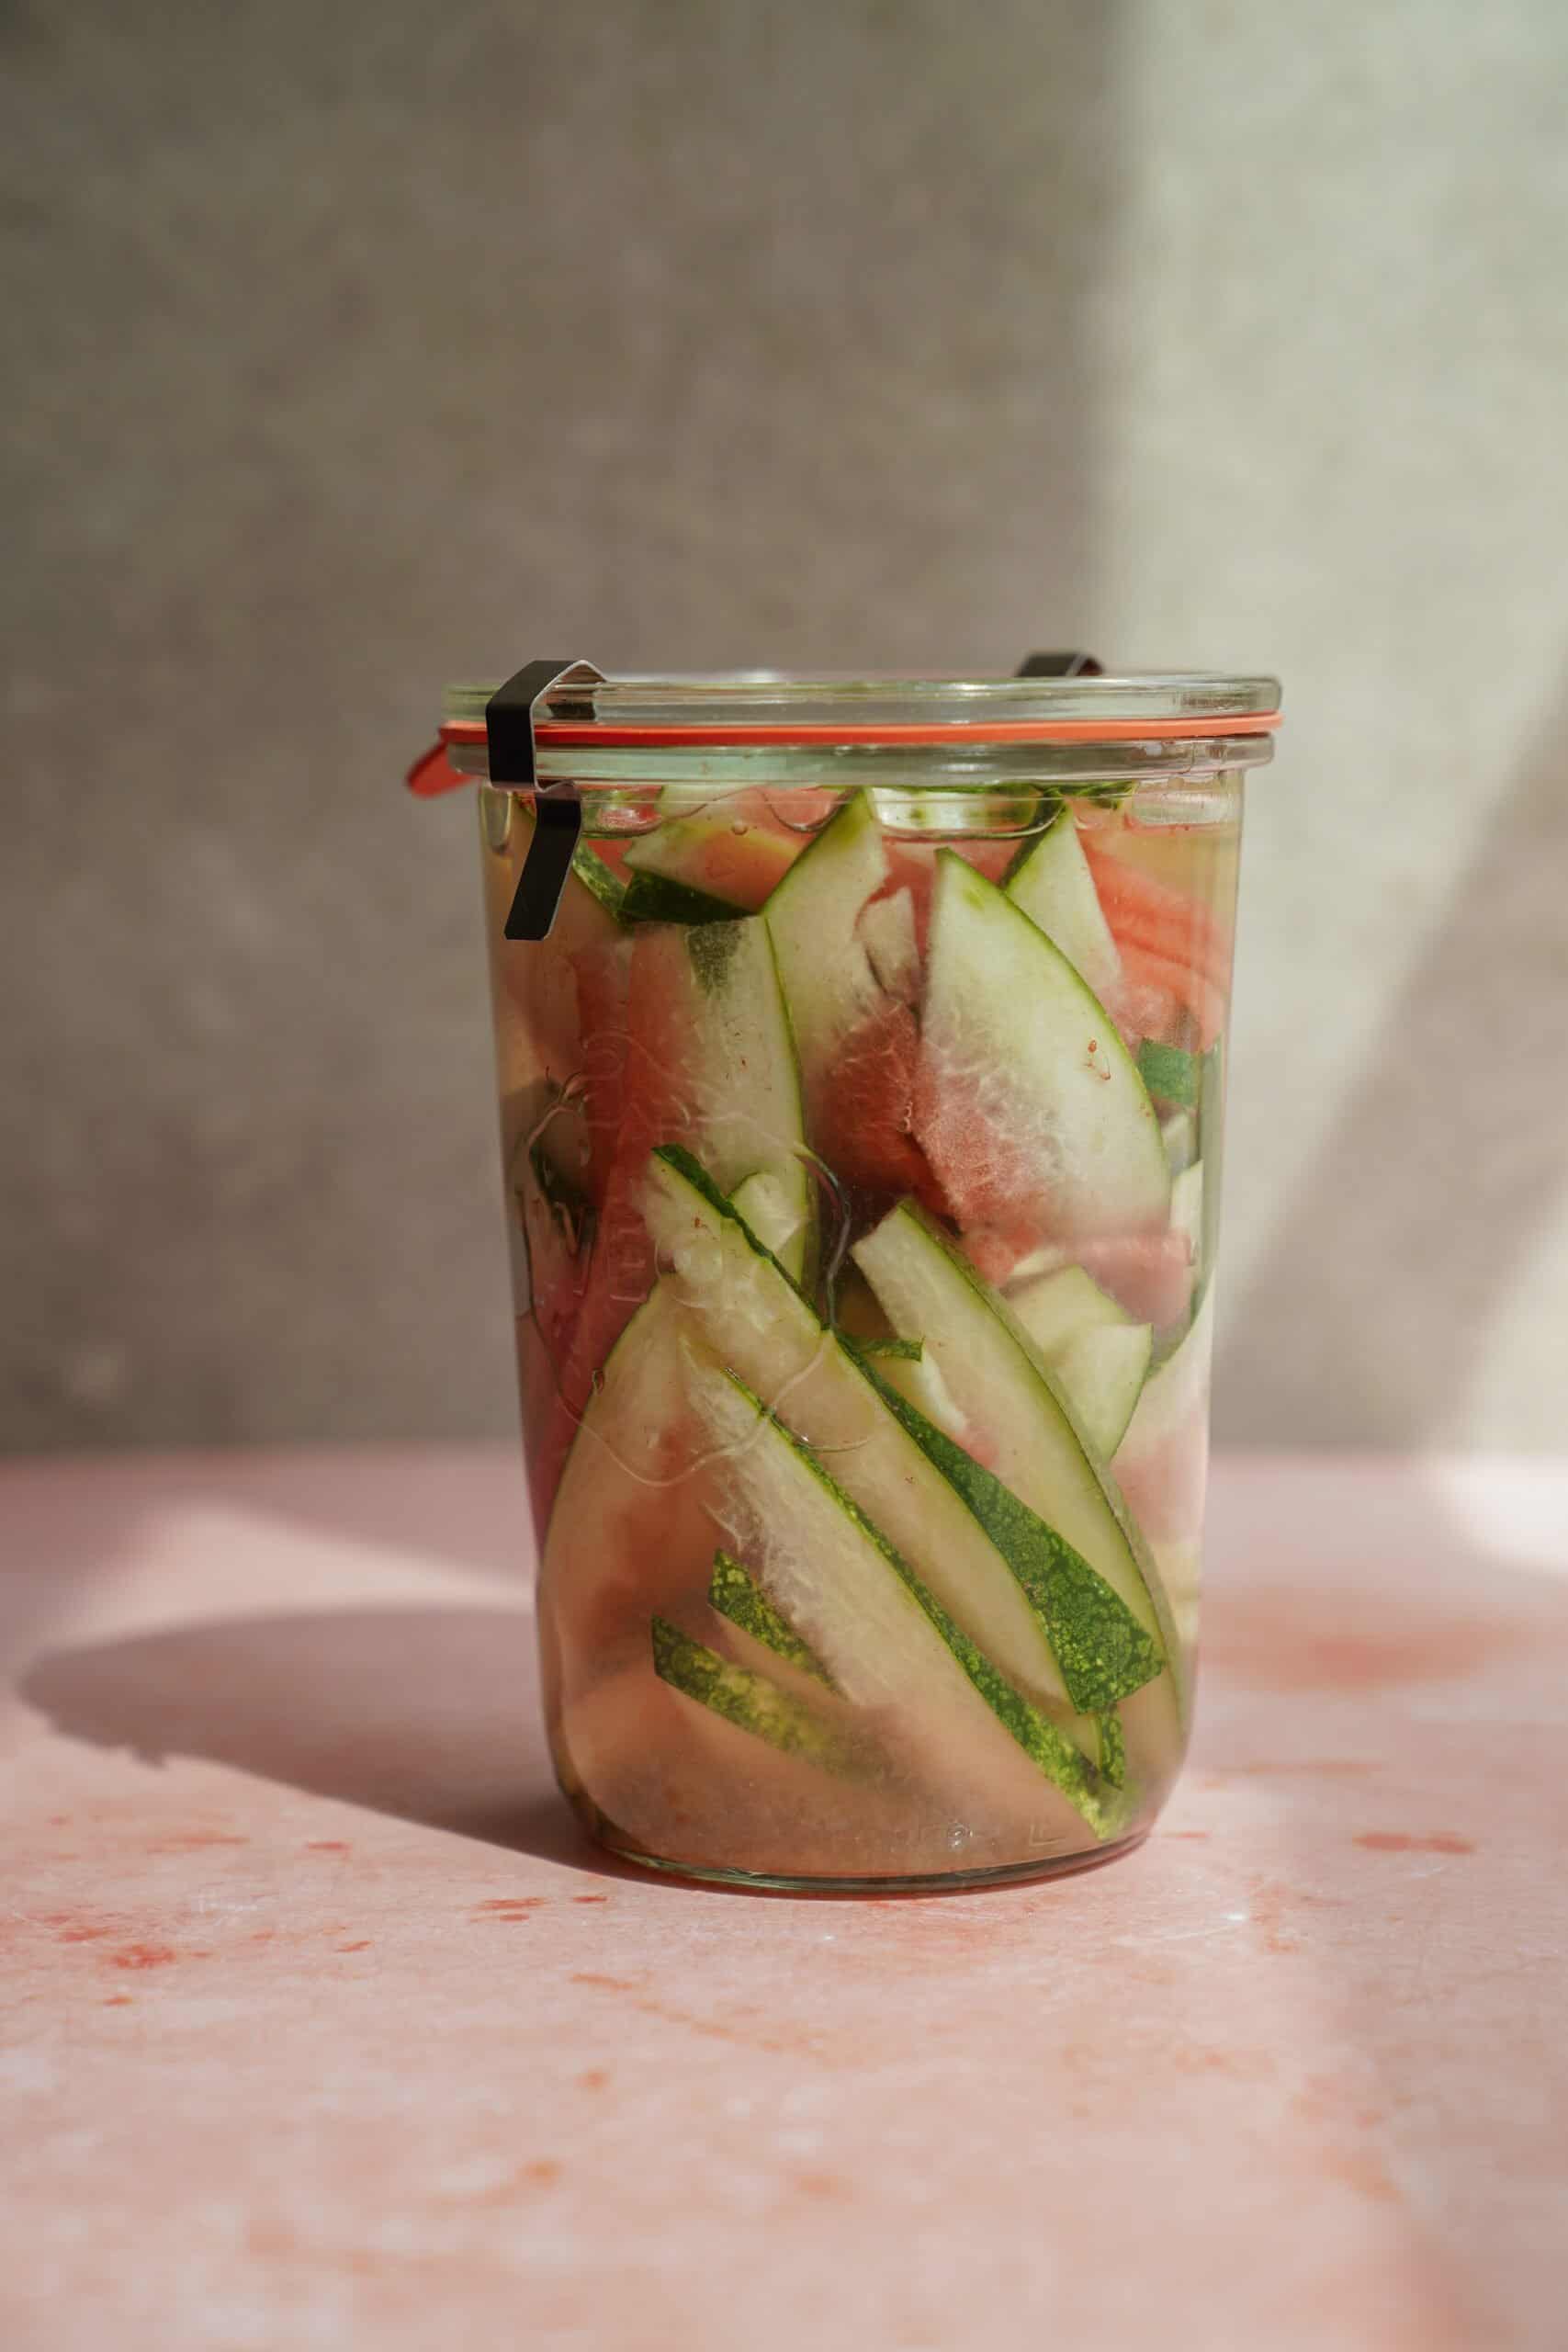 Pickled watermelon rind in a jar